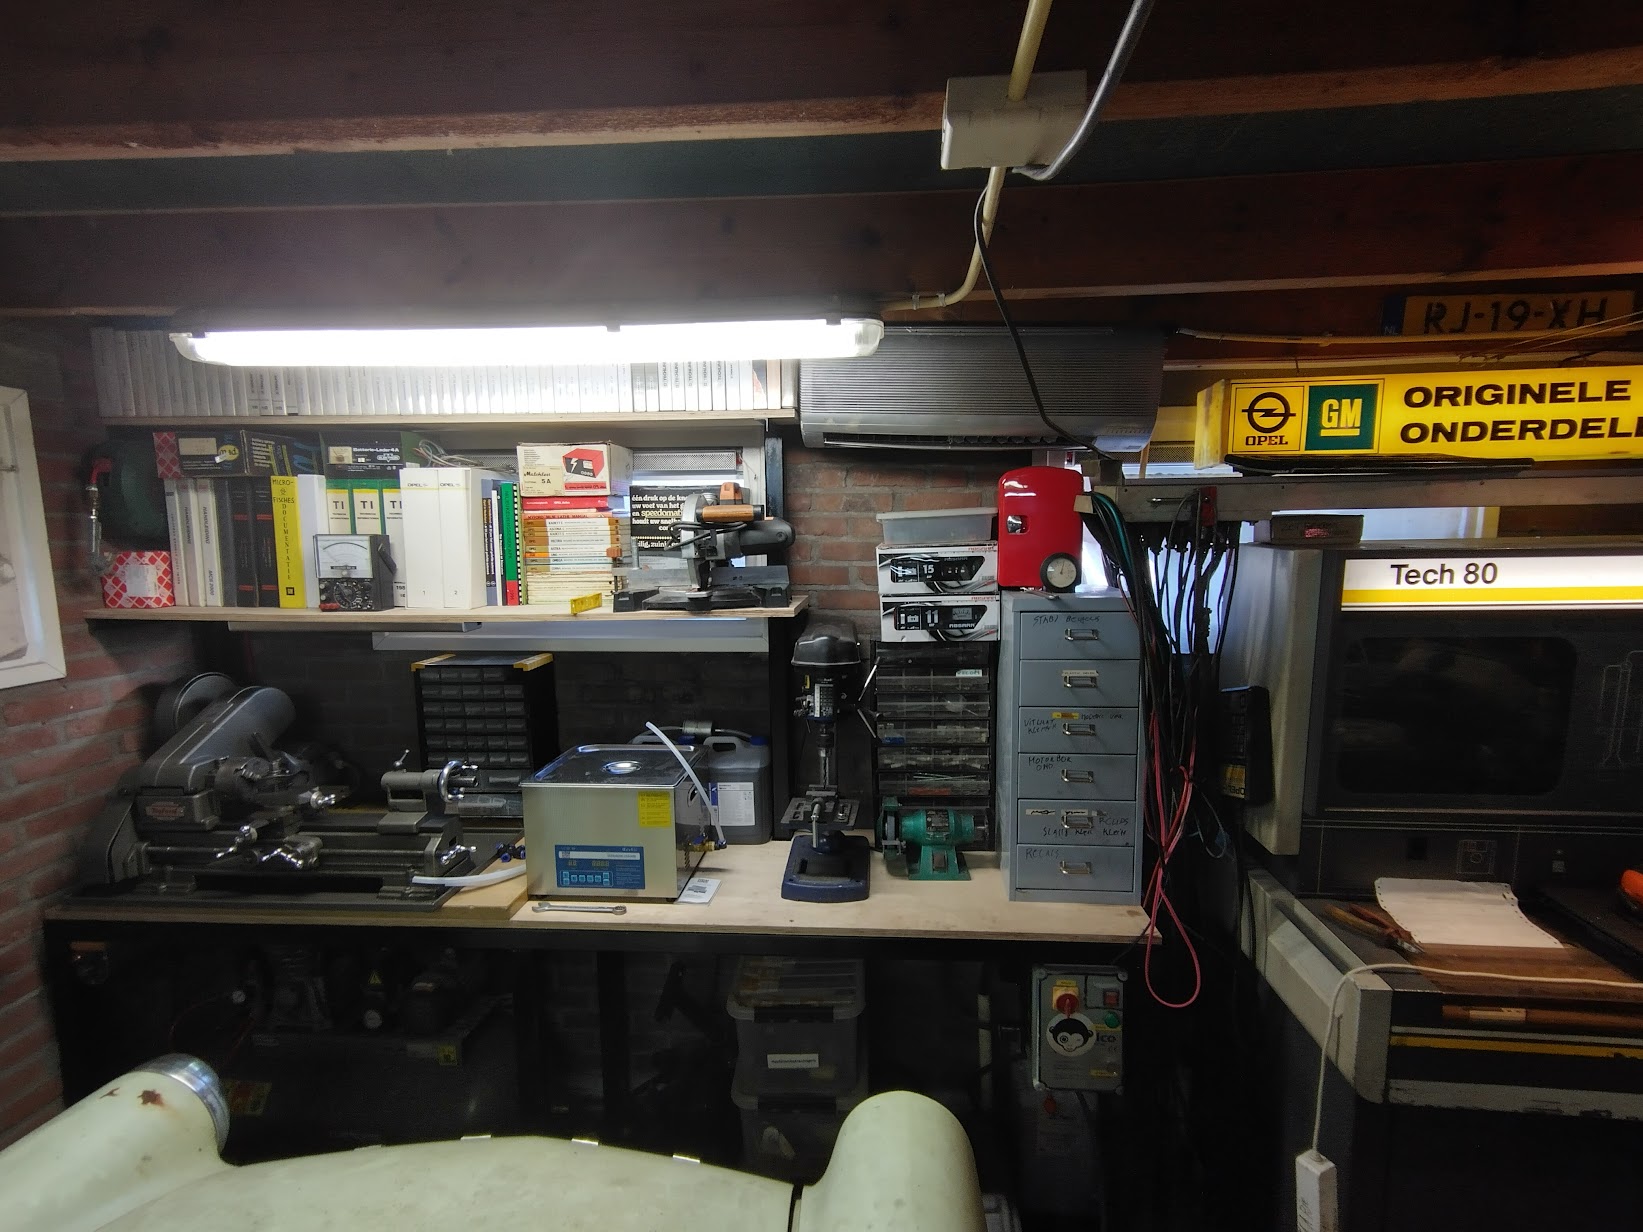 New workbench in the rear of the garage